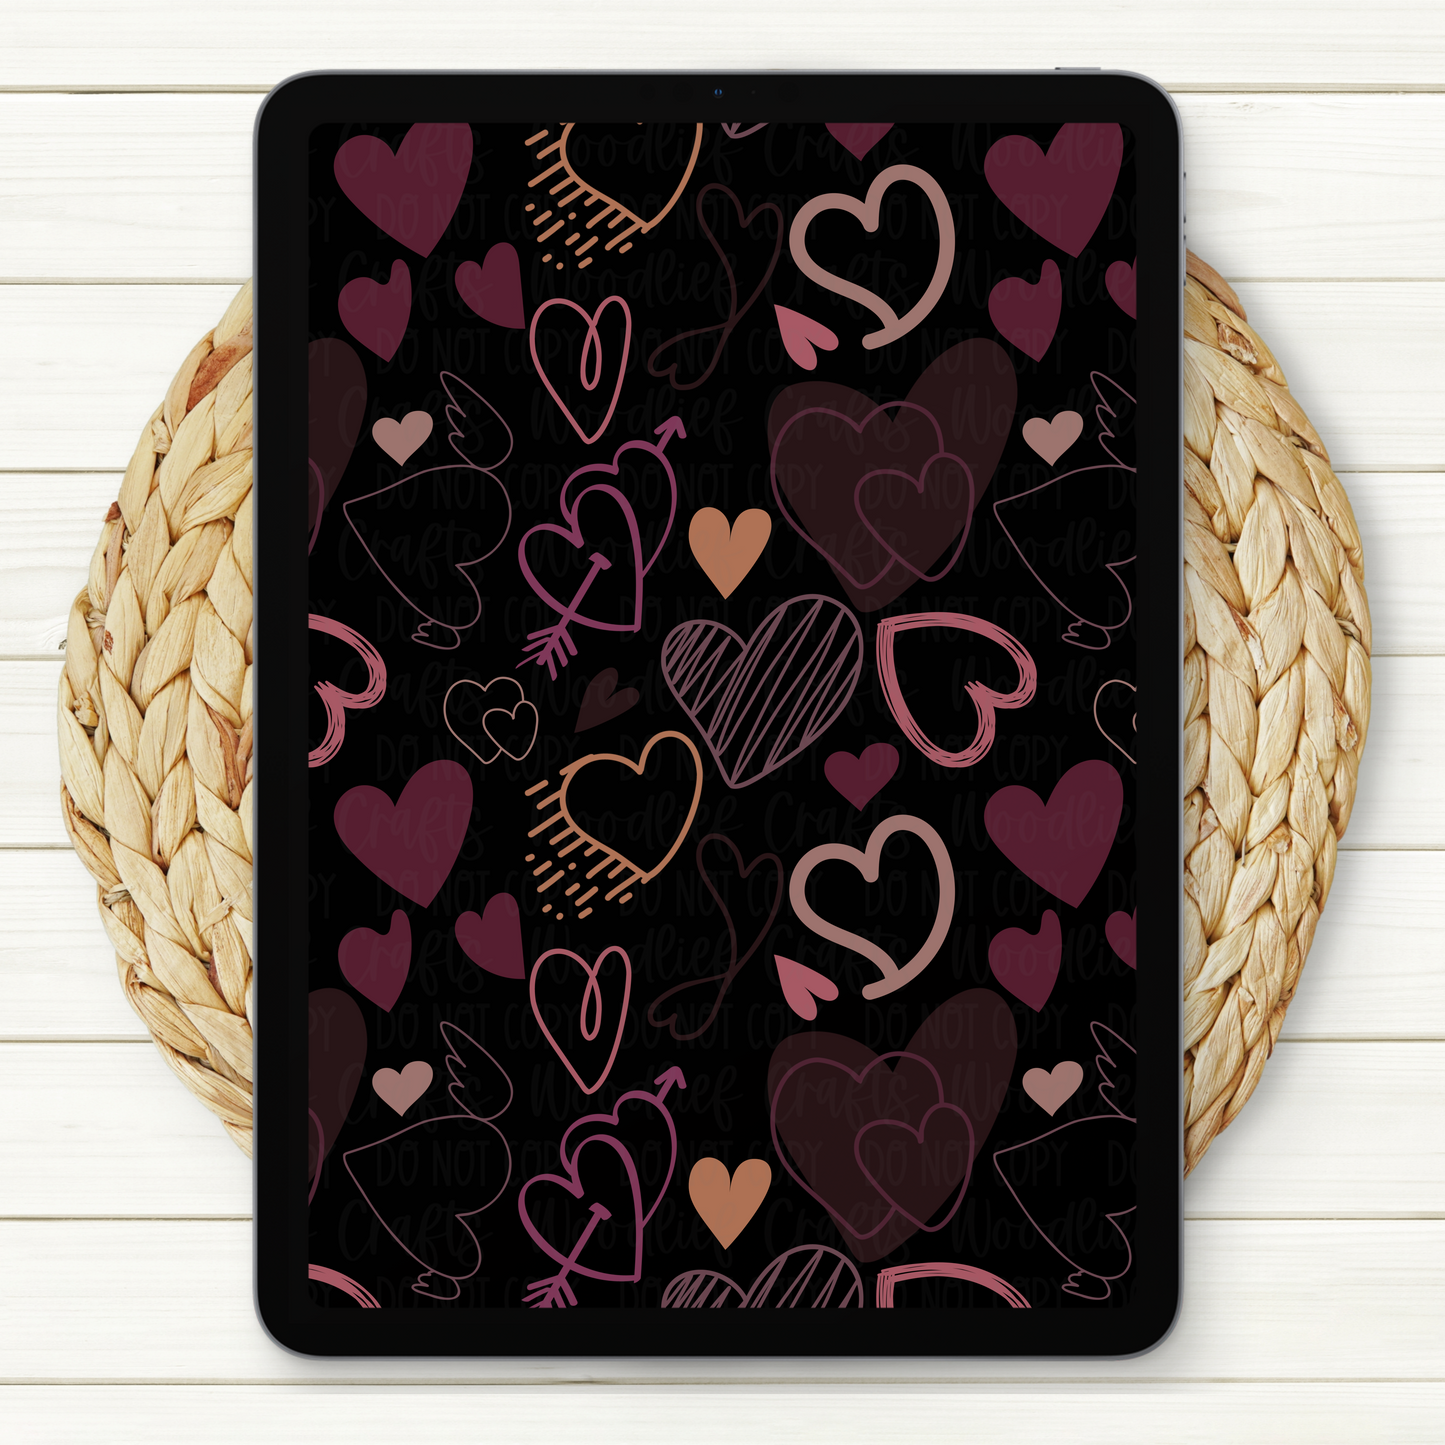 Doodle Hearts Seamless Digital Paper | Two Scales Included | Black